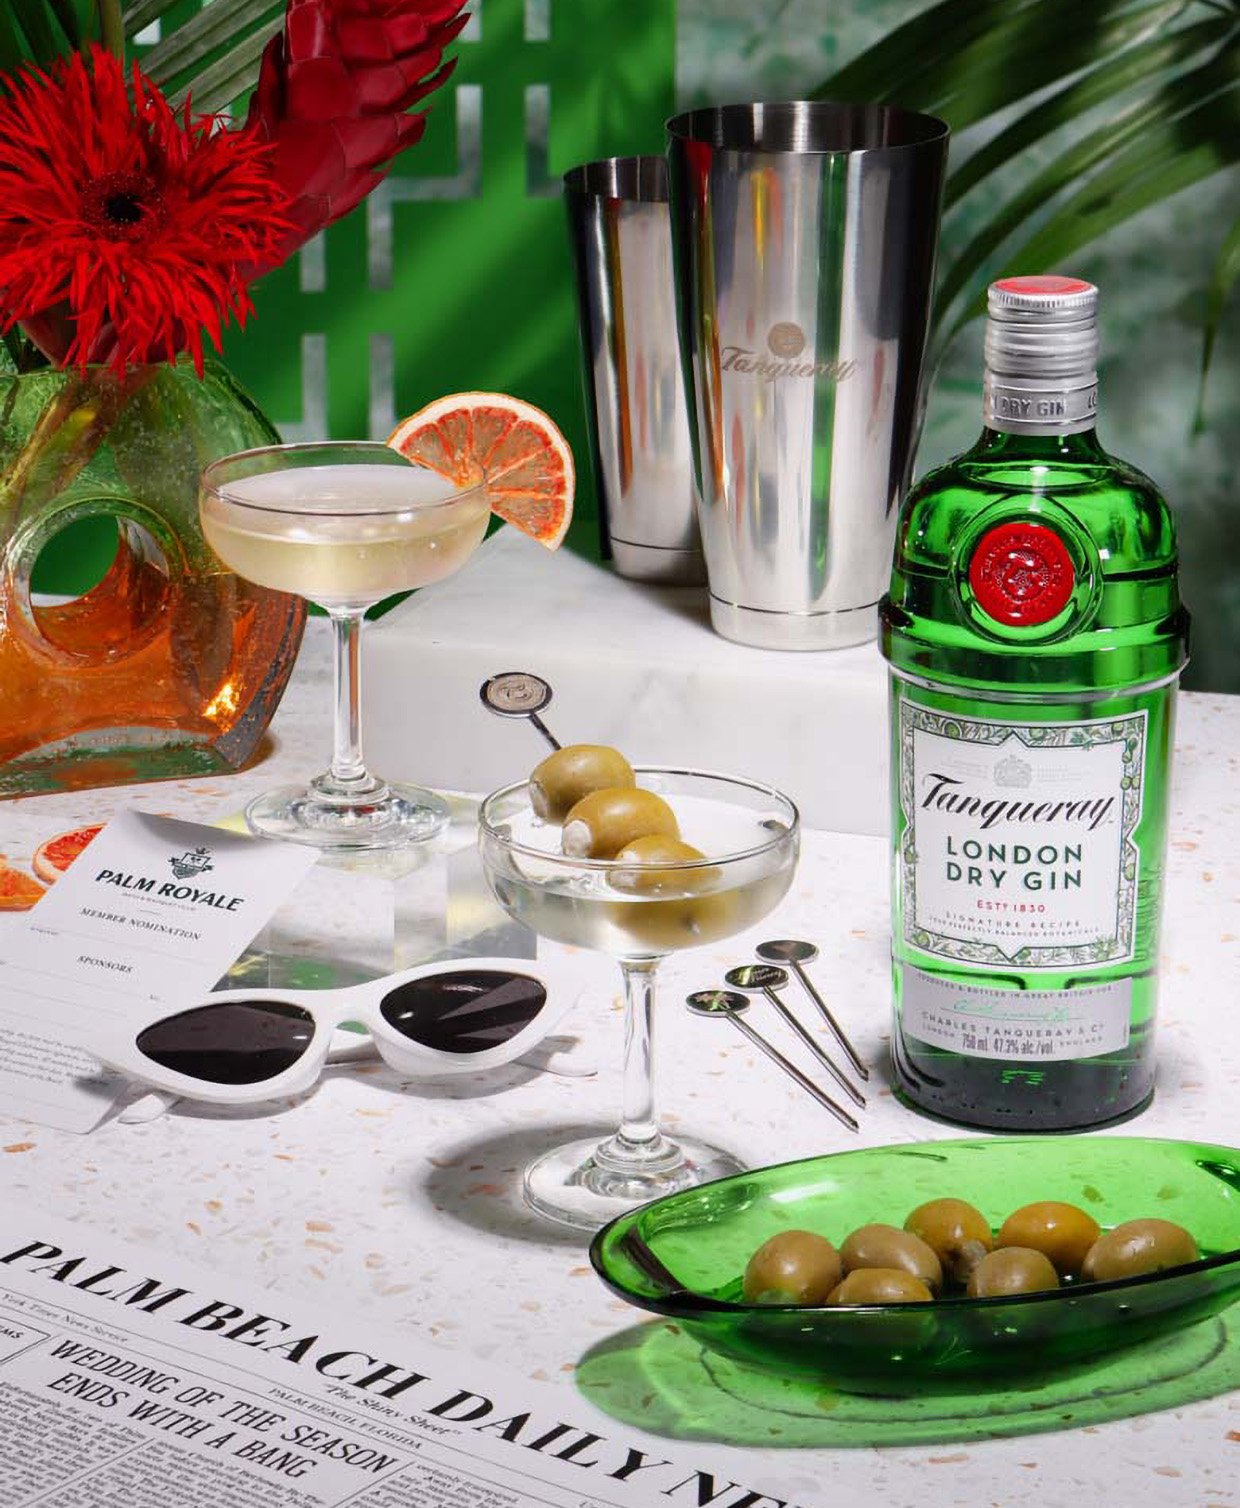 Cocktail Courier x Palm Royale Tanqueray Martini Kit